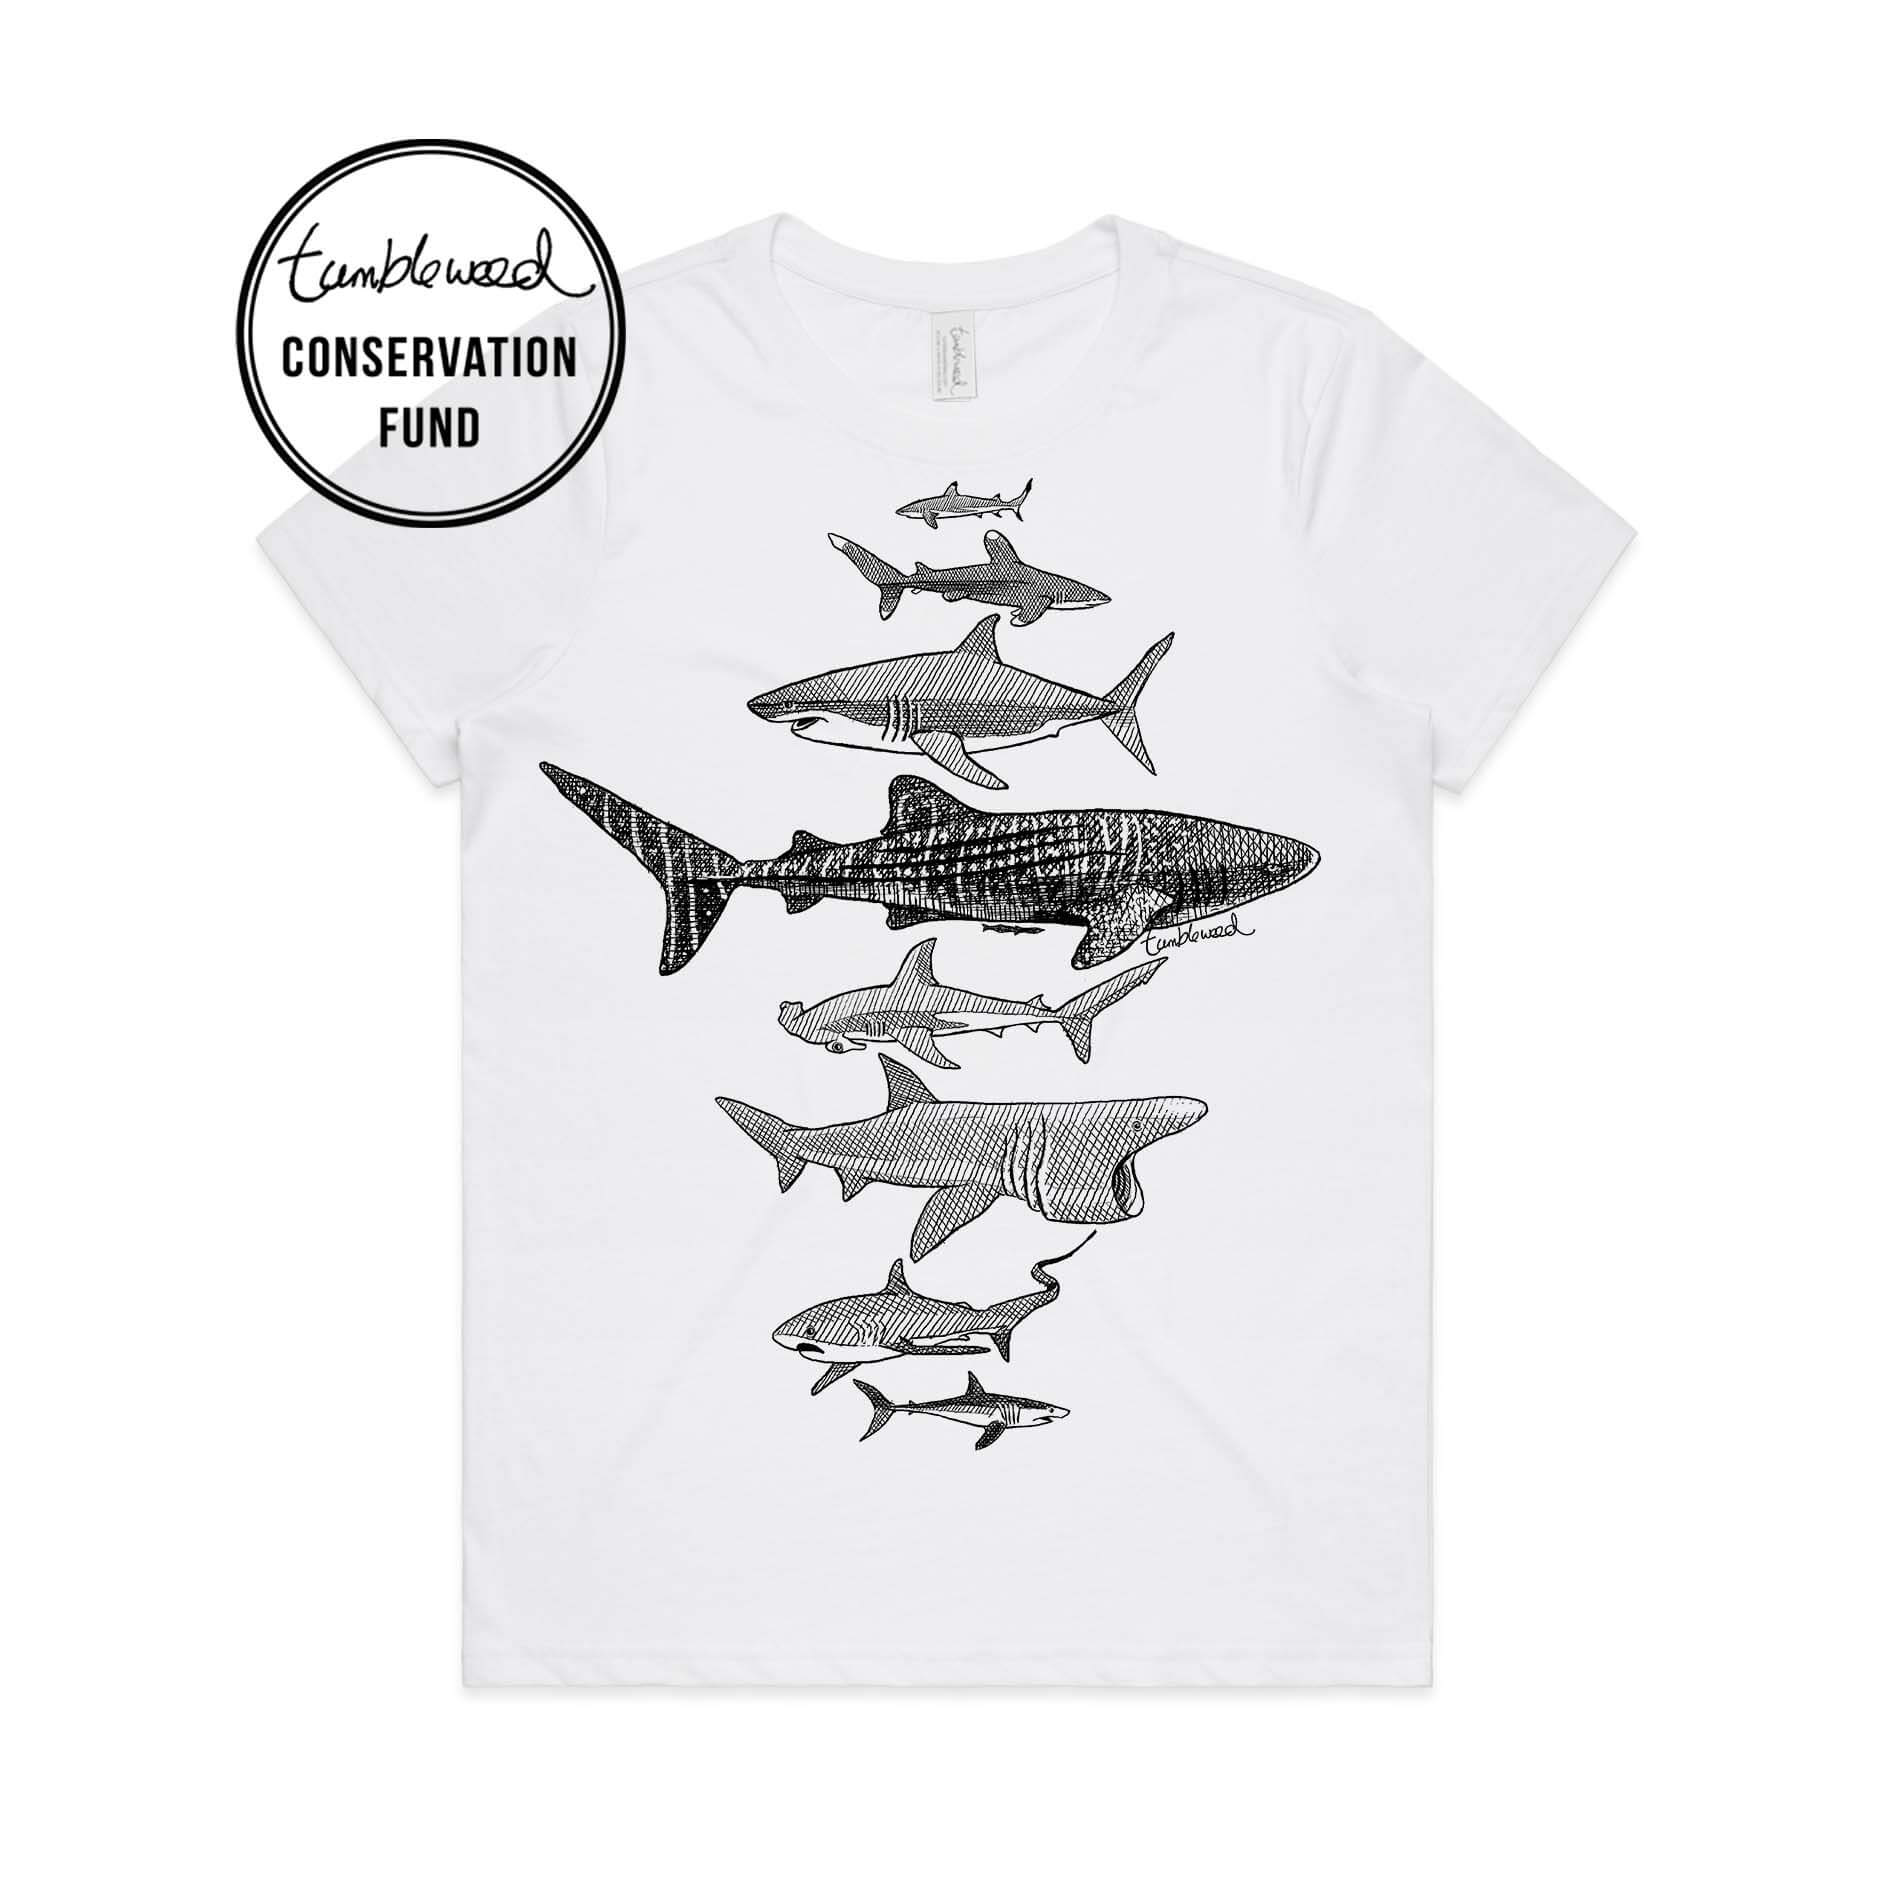 White, female t-shirt featuring a screen printed Sharks design.